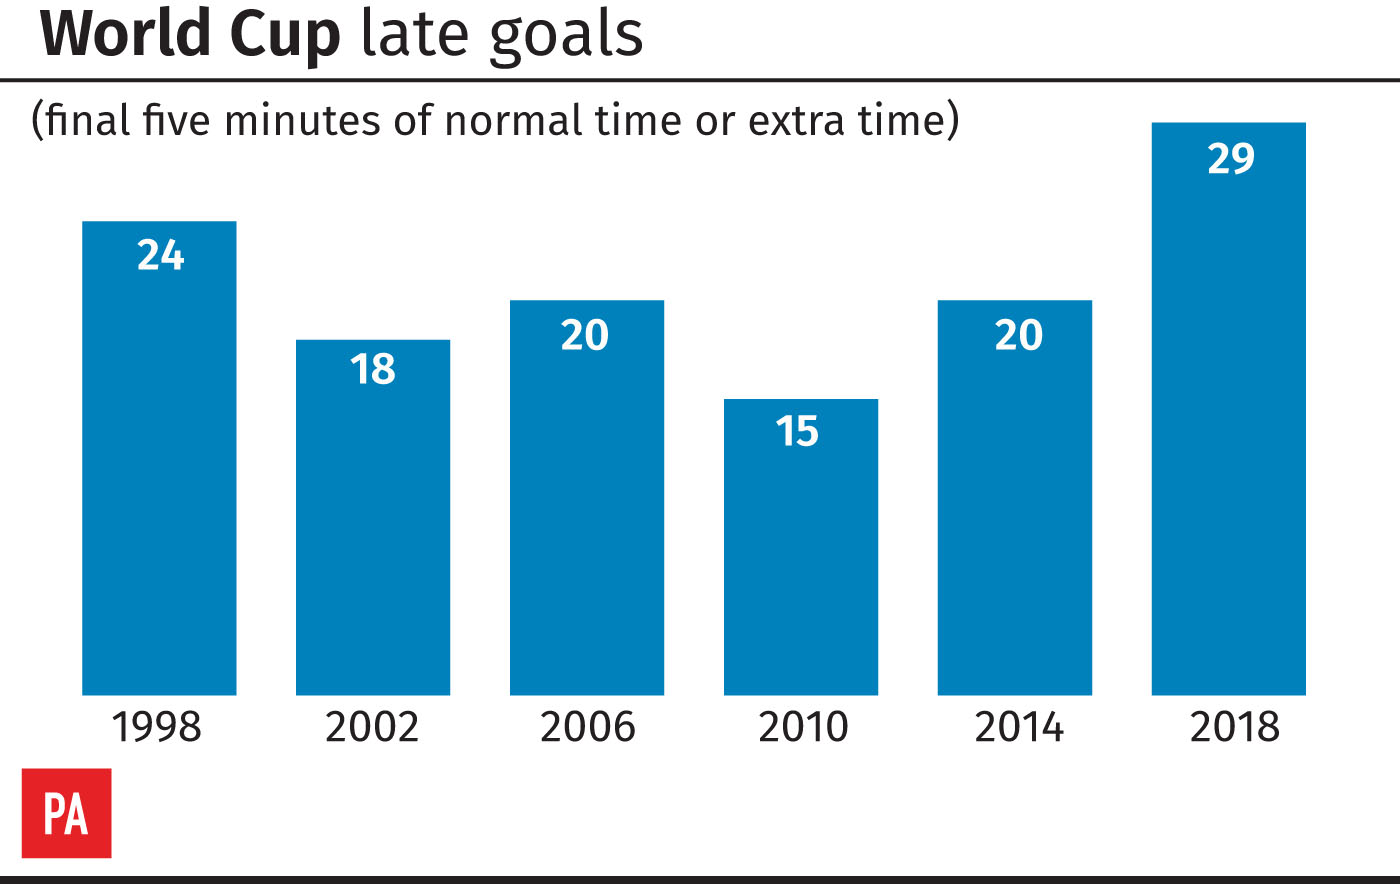 Late goals at each World Cup since 1998